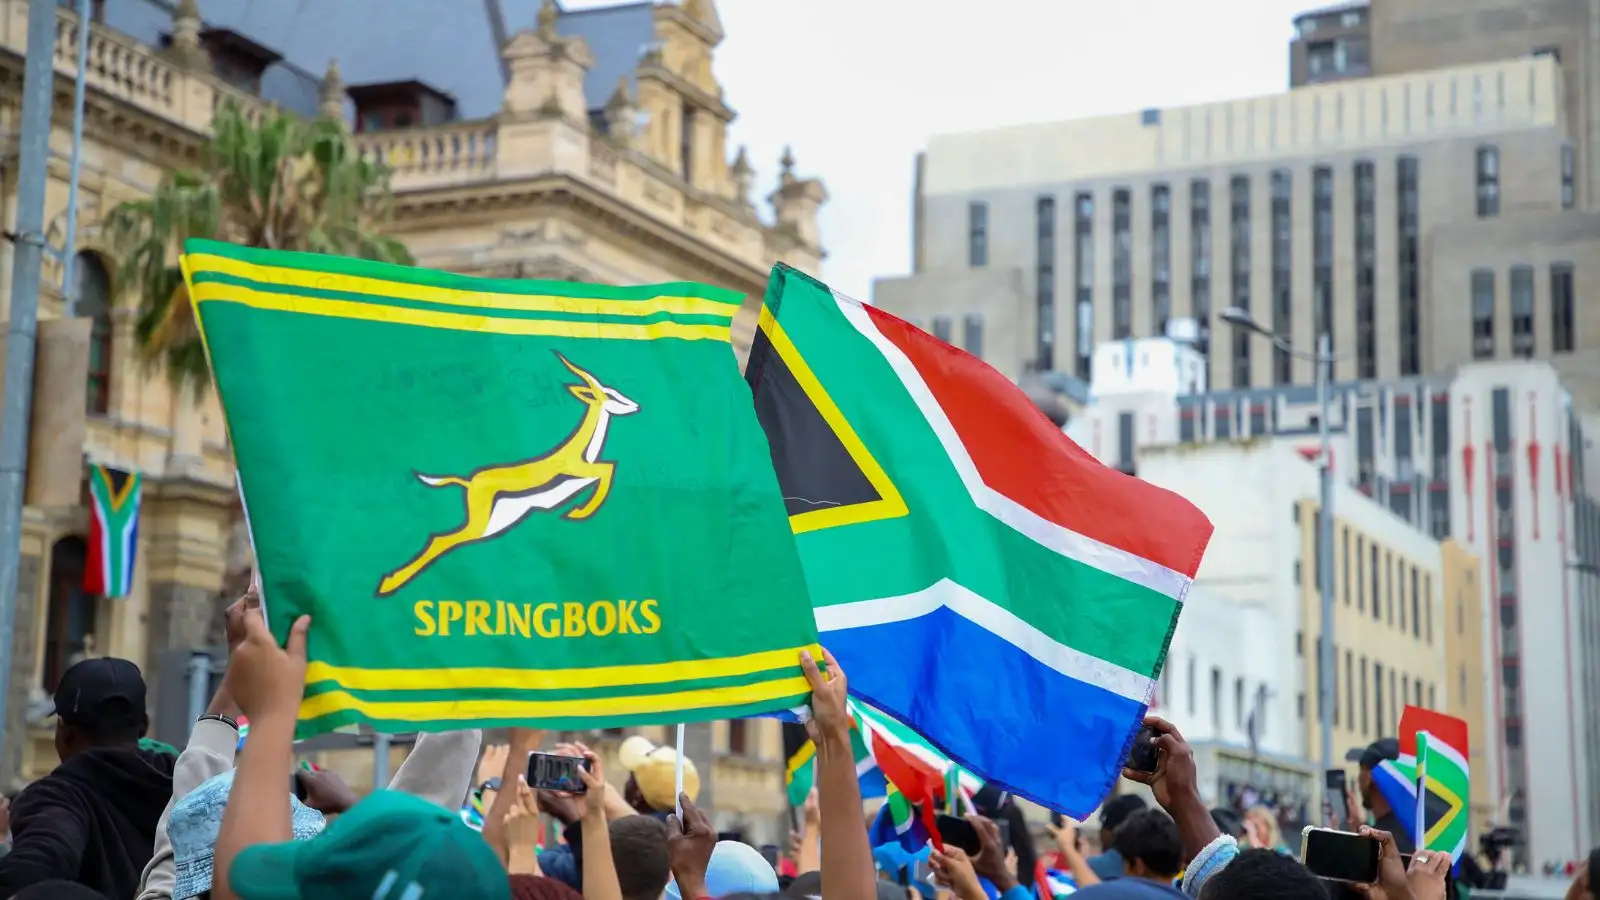 Fans wave a Springbok flag and South African flag in front of the City Hall during the Springbok Trophy tour.